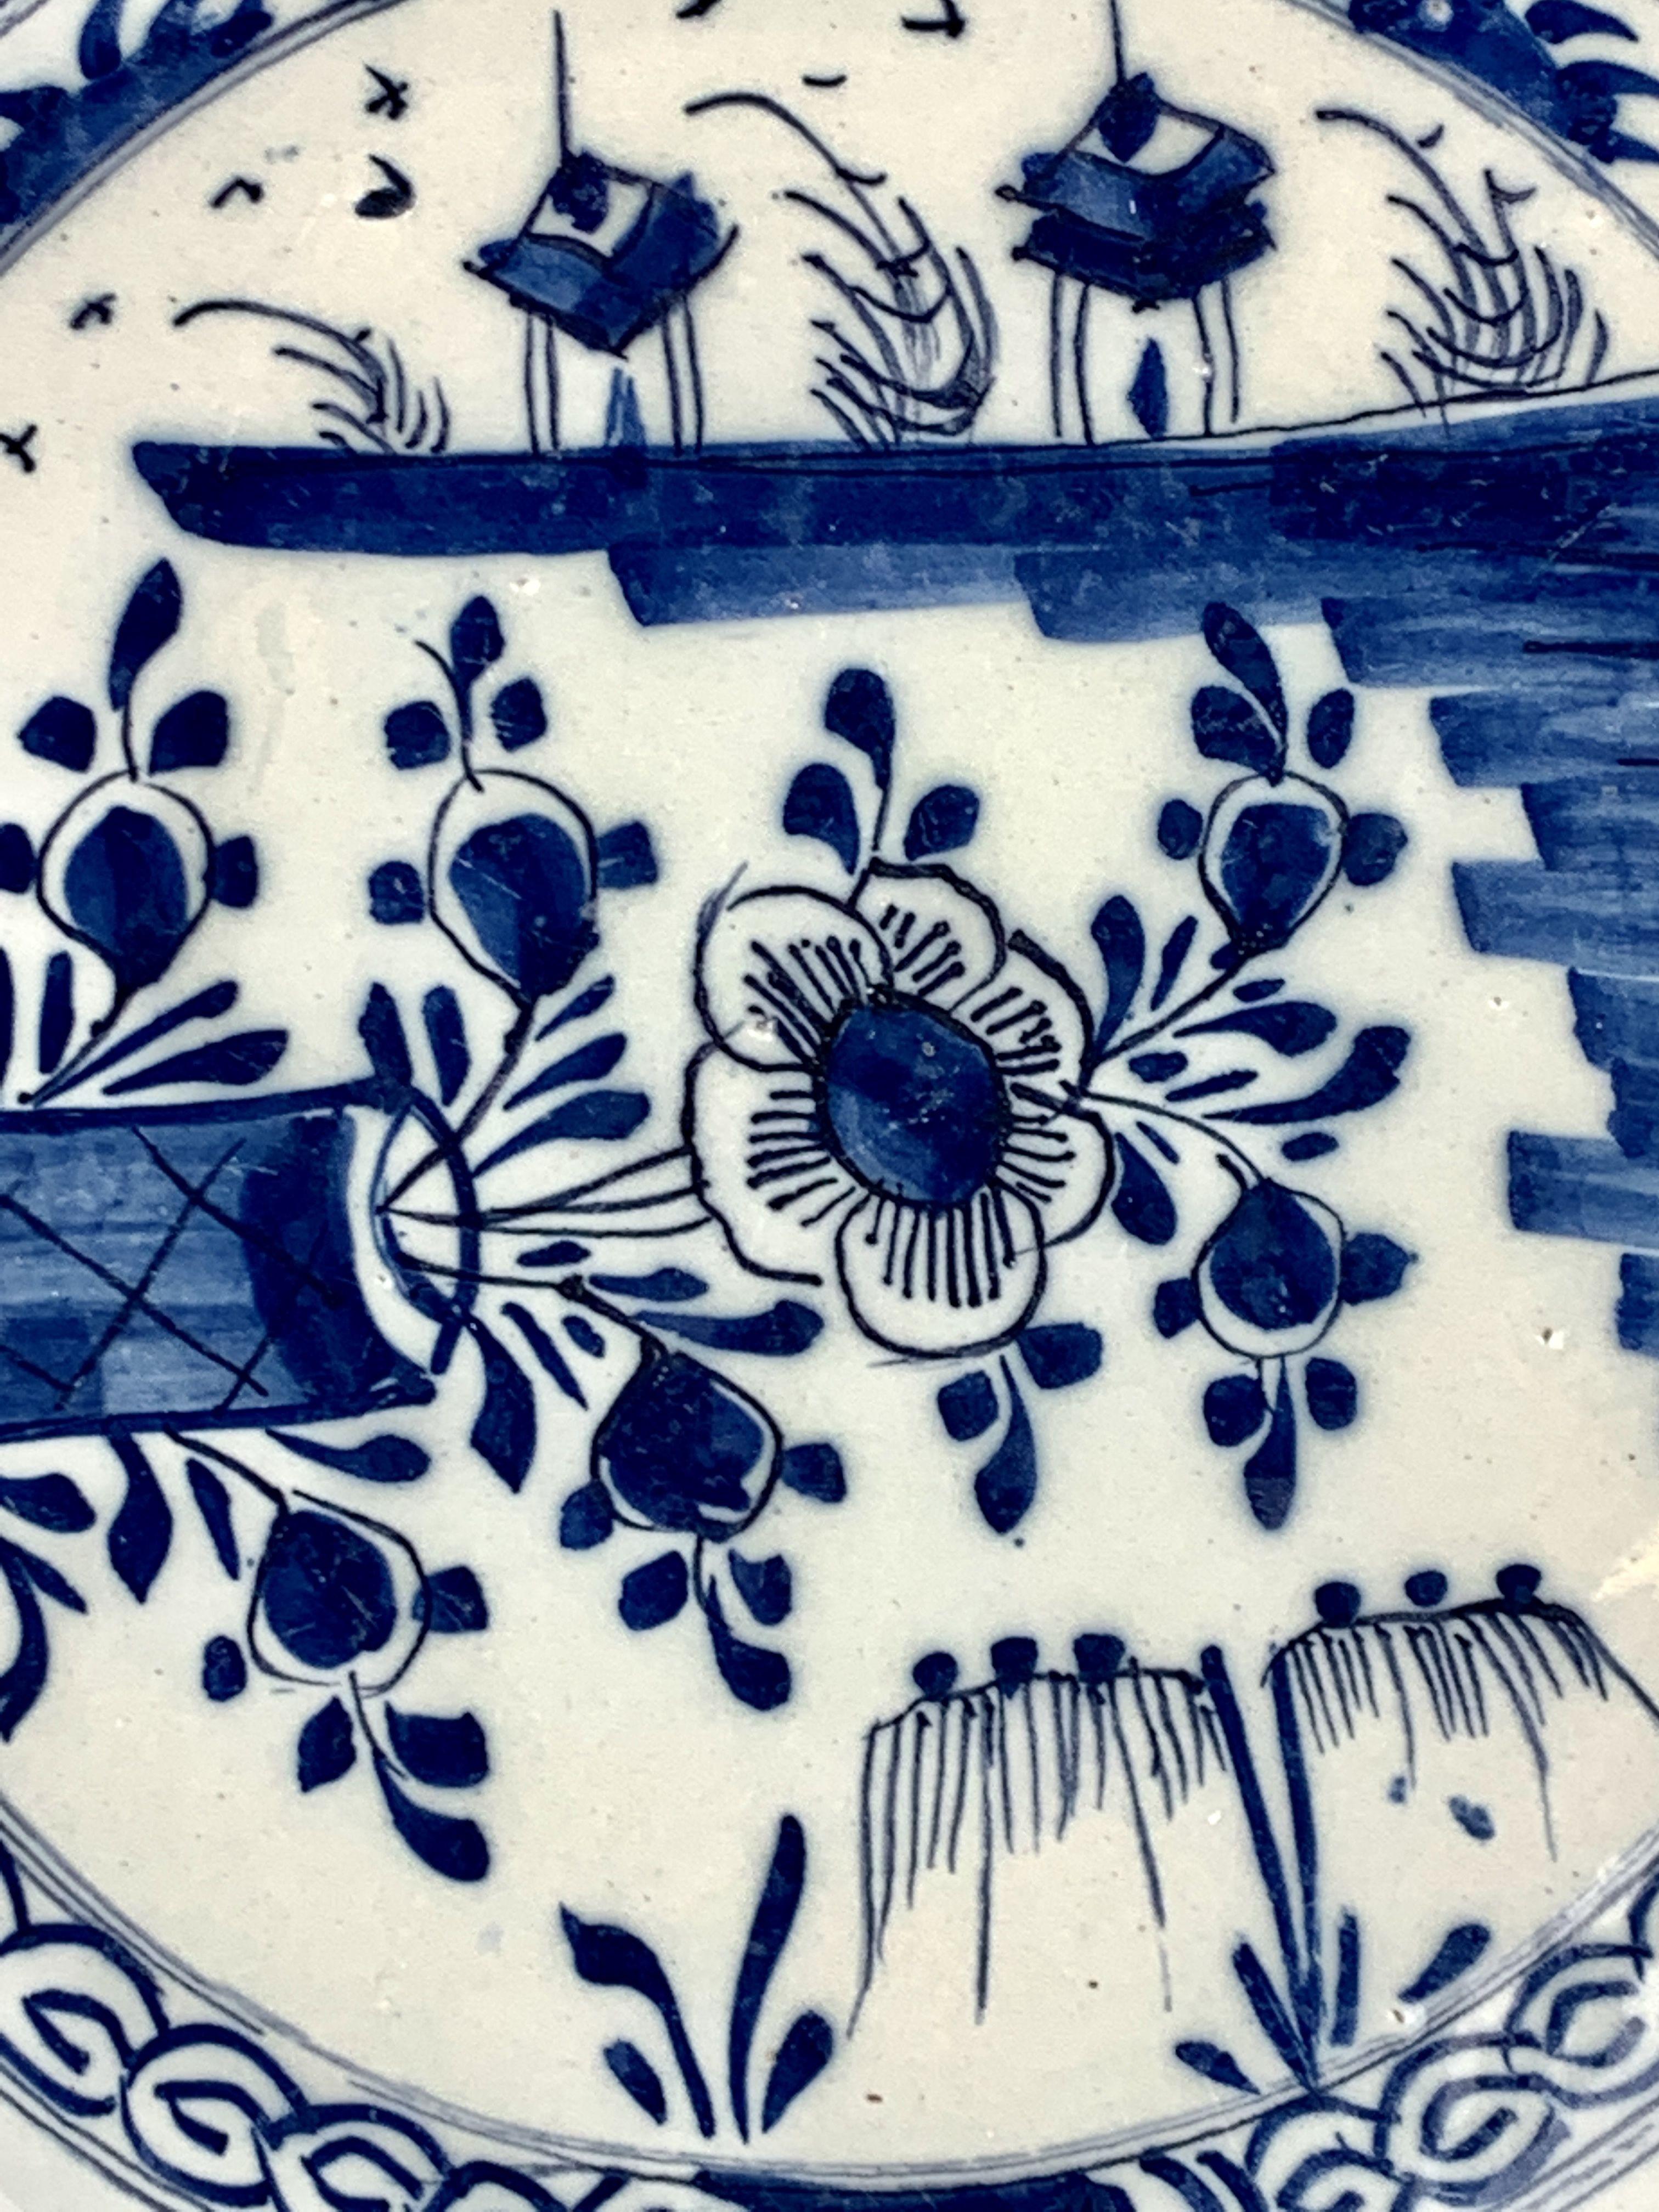 Blue and White Delft Charger Made Netherlands circa 1770 Chinoiserie Decoration In Excellent Condition For Sale In Katonah, NY